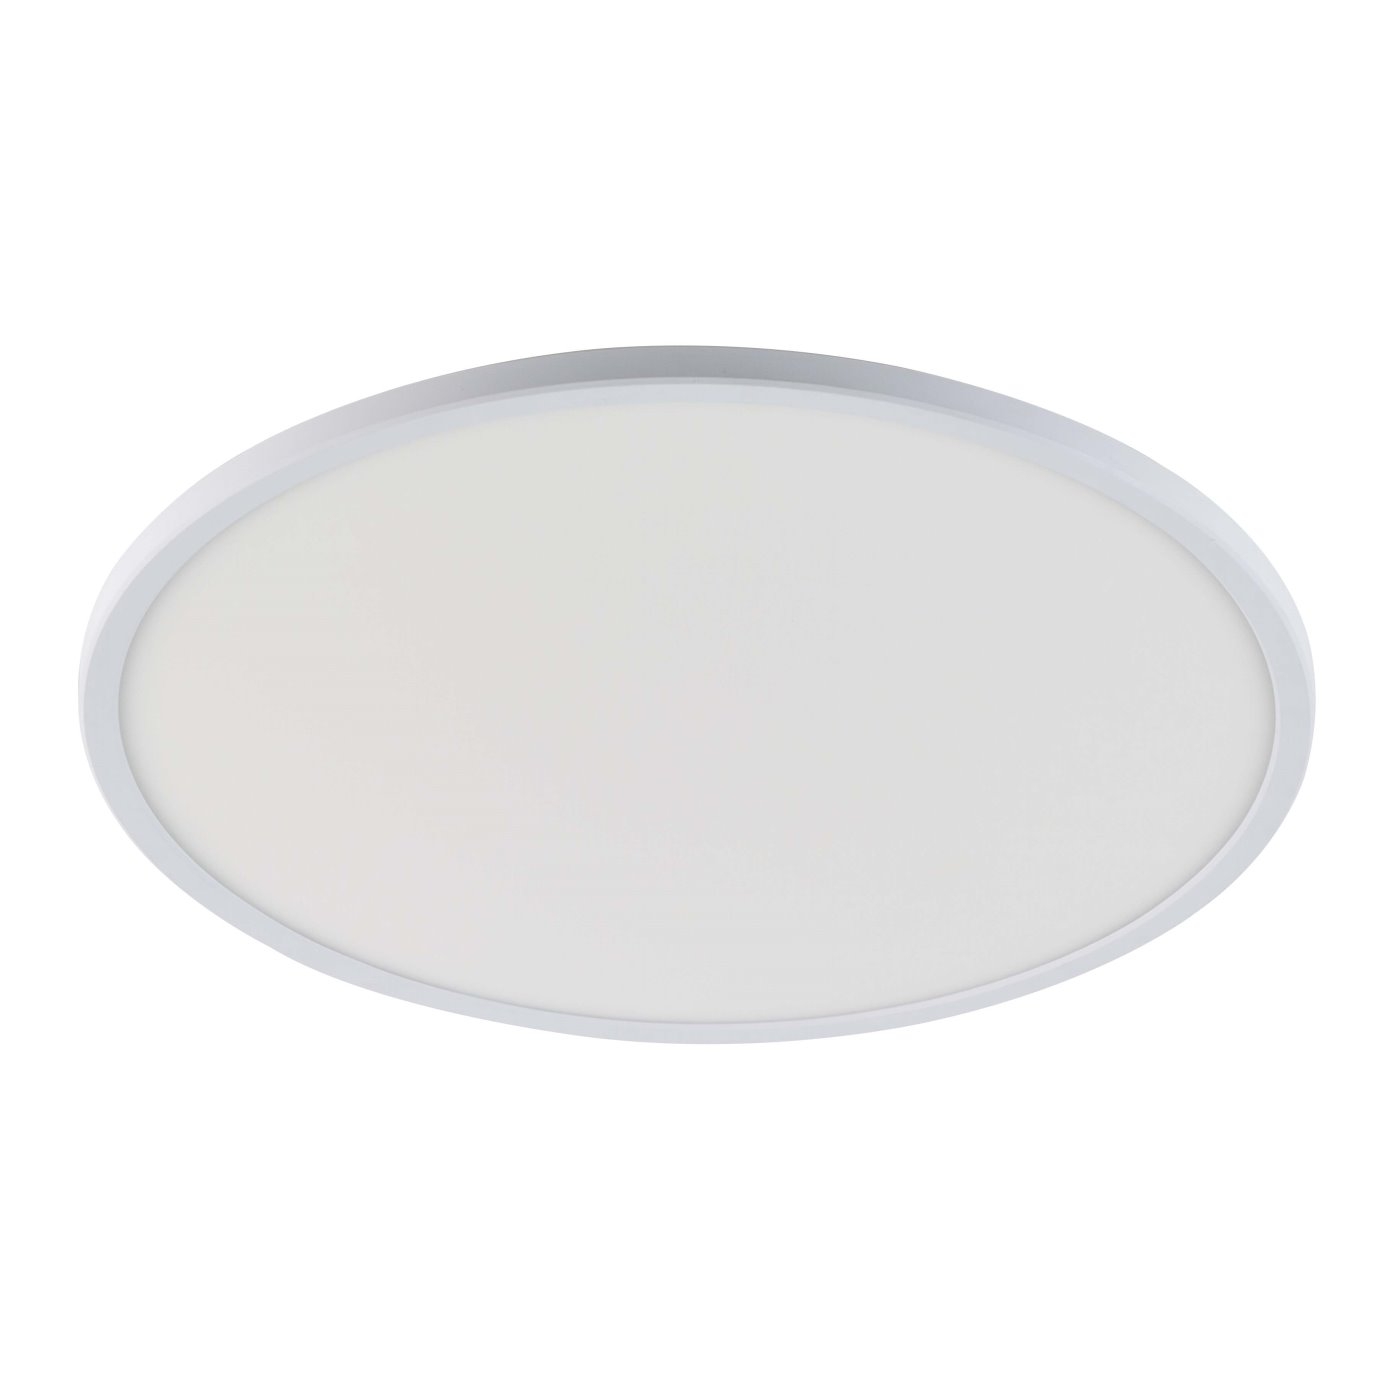 LED Deckenlampe weiss Nordlux Oja 42 IP54 2150lm 2700K dimmbar